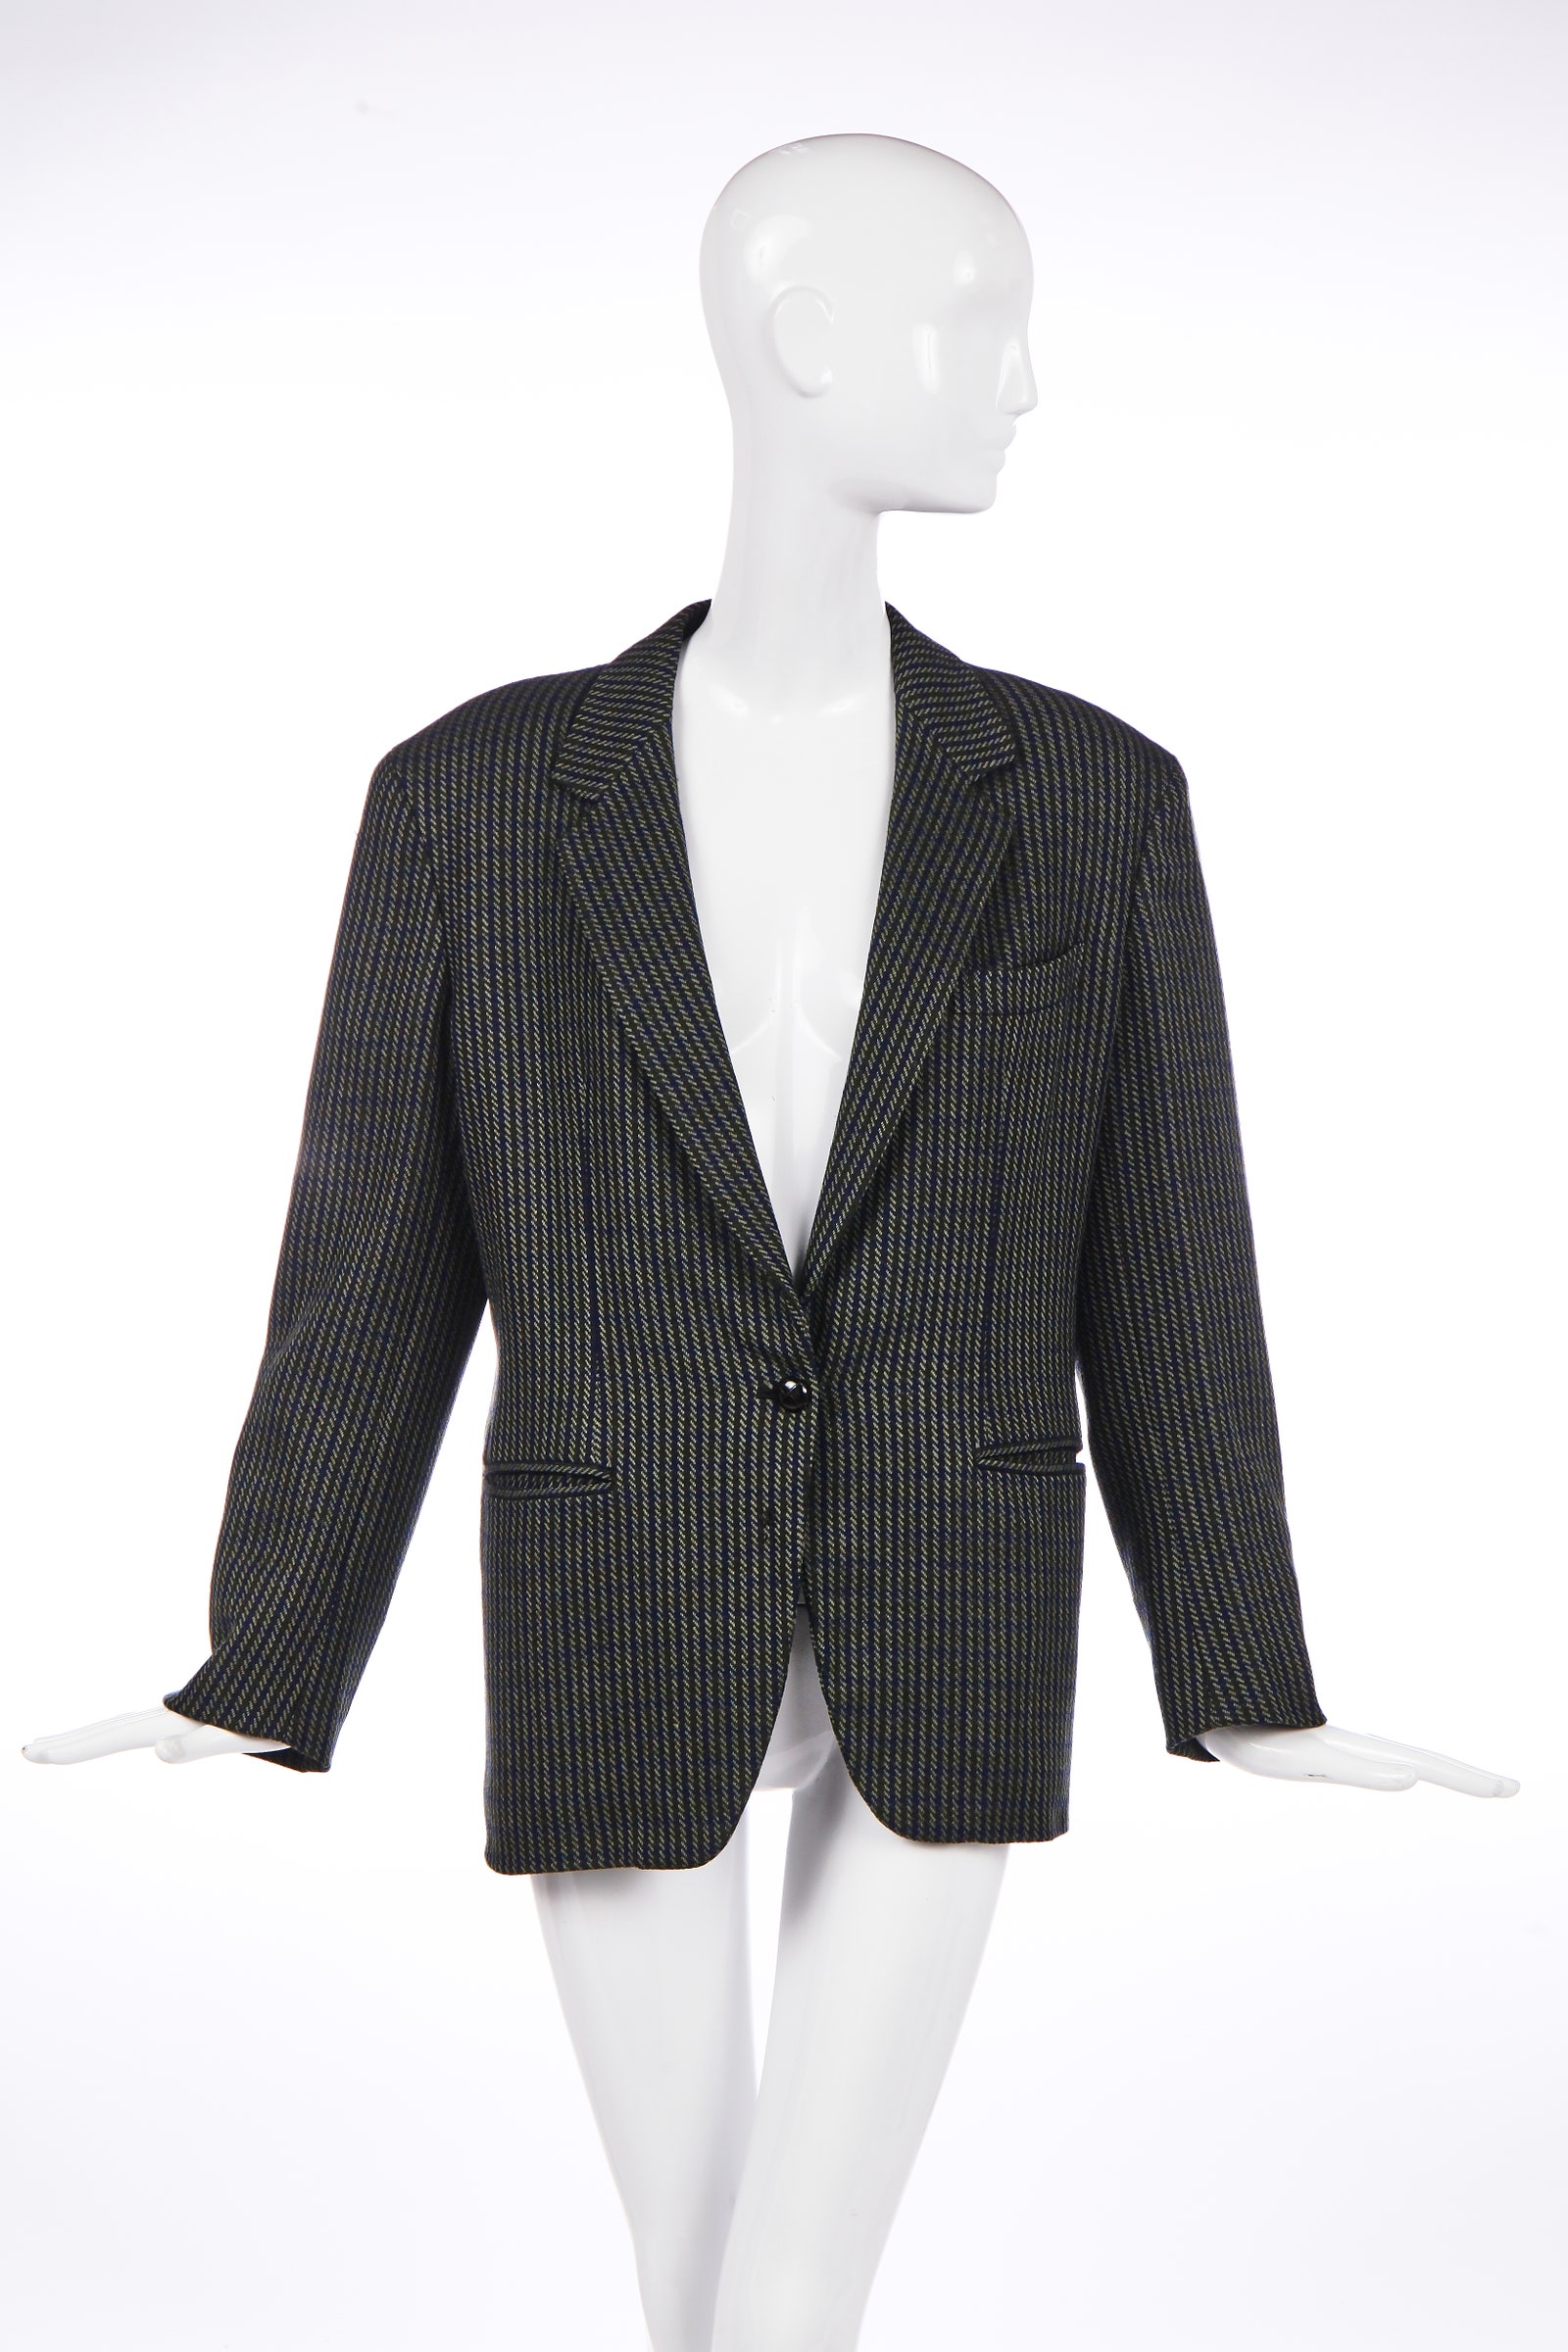 The checked Turnbull amp Asser blazer thats believed to have been worn by Princess Diana.